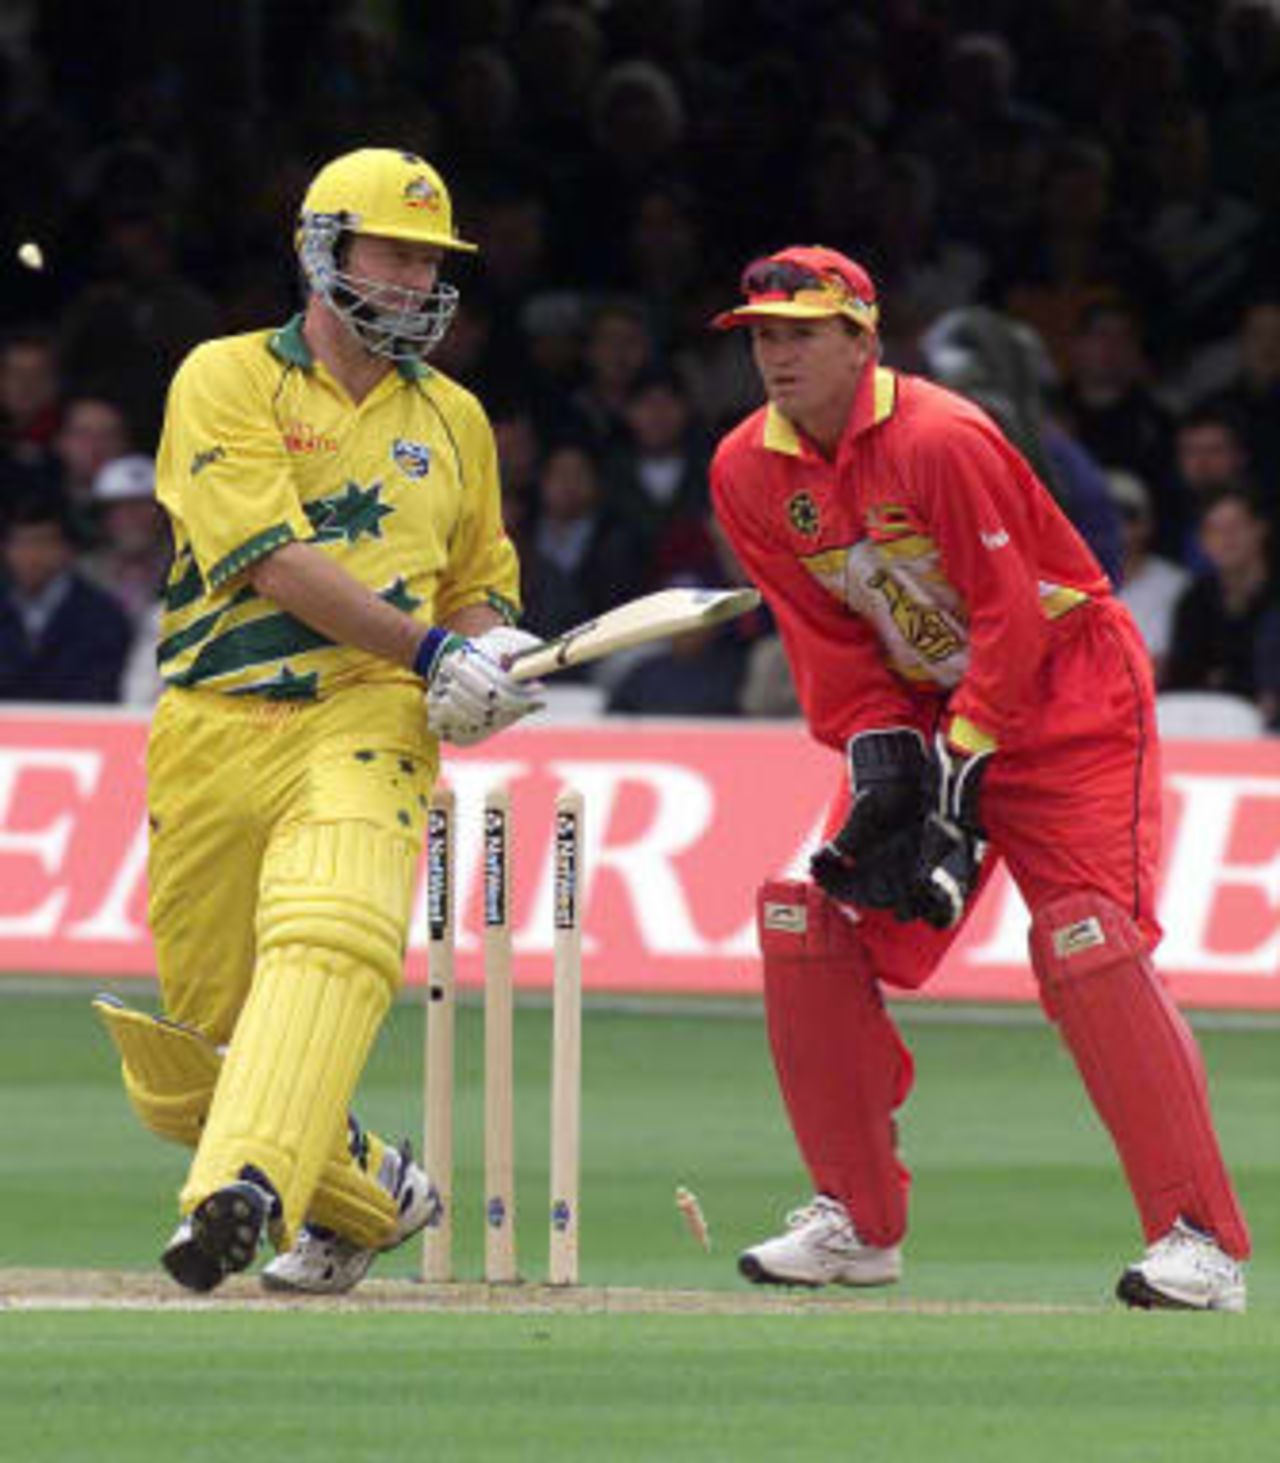 Australia`s captain Steve Waugh (L) bowled by Guy Whittall for 62 during the Australian innings in the match between Zimbabwe vs. Australia in the Cricket World Cup match at Lords 09 June 1999